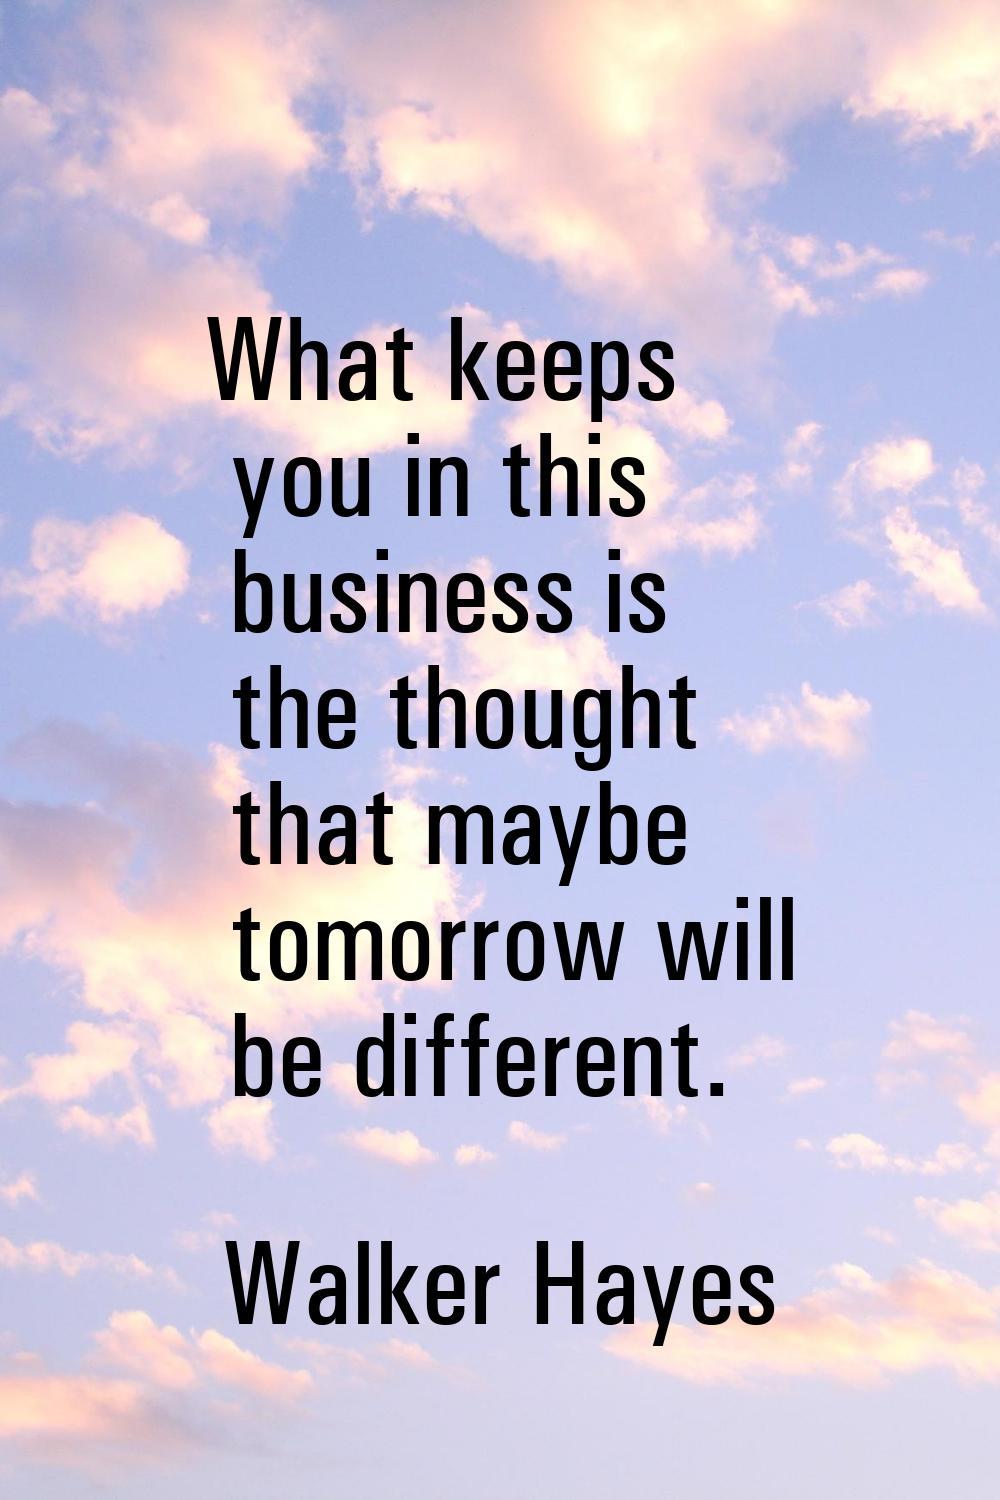 What keeps you in this business is the thought that maybe tomorrow will be different.